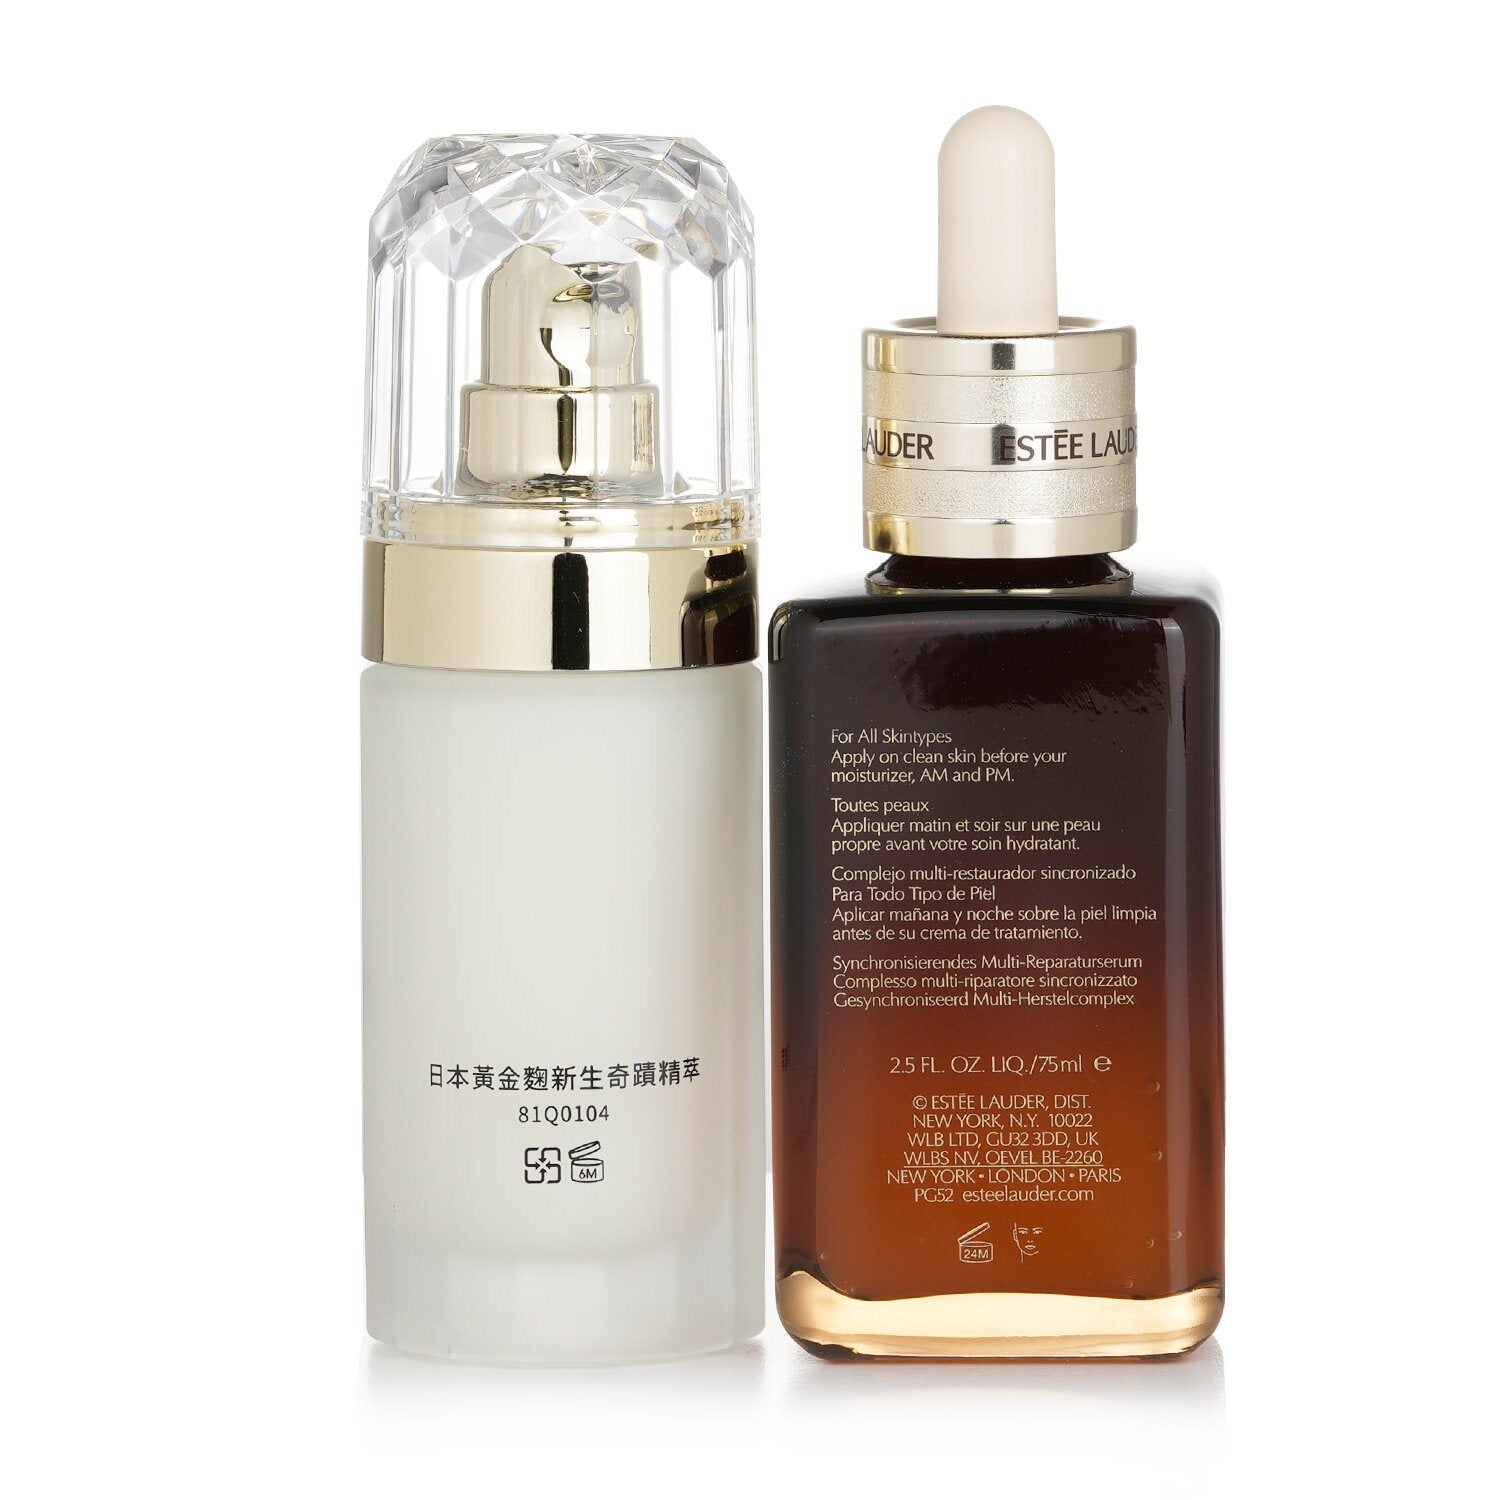 ESTEE LAUDER - (For EDD Int) Advanced Night Repair Synchronized Multi-Recovery Complex 75ml (Free: Natural Beauty BIO UP Firming Serum 40ml) 2pcs - lolaluxeshop